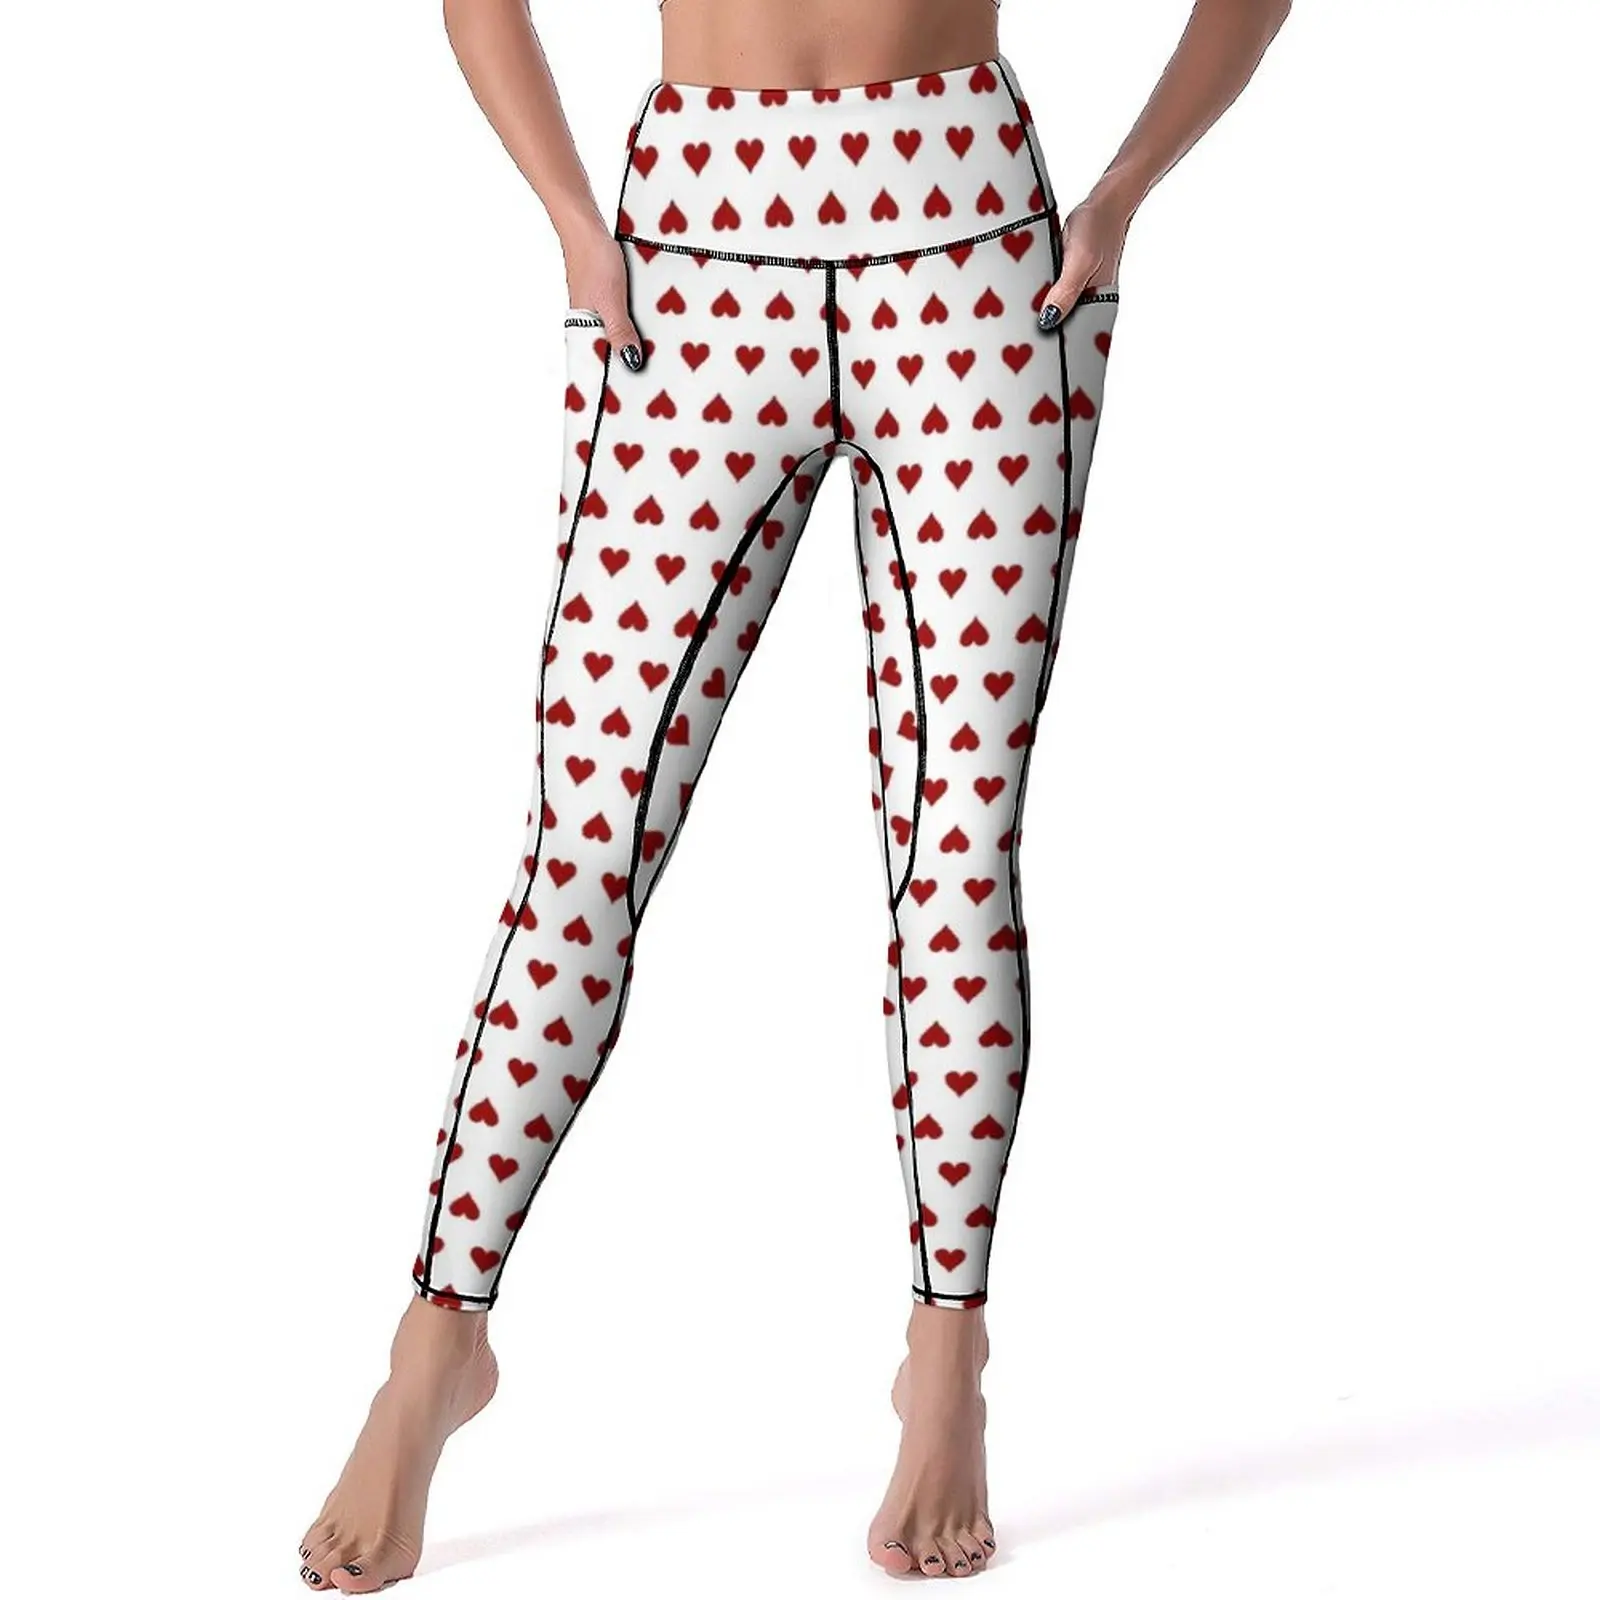 

Red Poker Hearts Leggings Sexy Playing Cards Print Push Up Yoga Pants Vintage Stretchy Leggins Lady Design Fitness Sports Tights